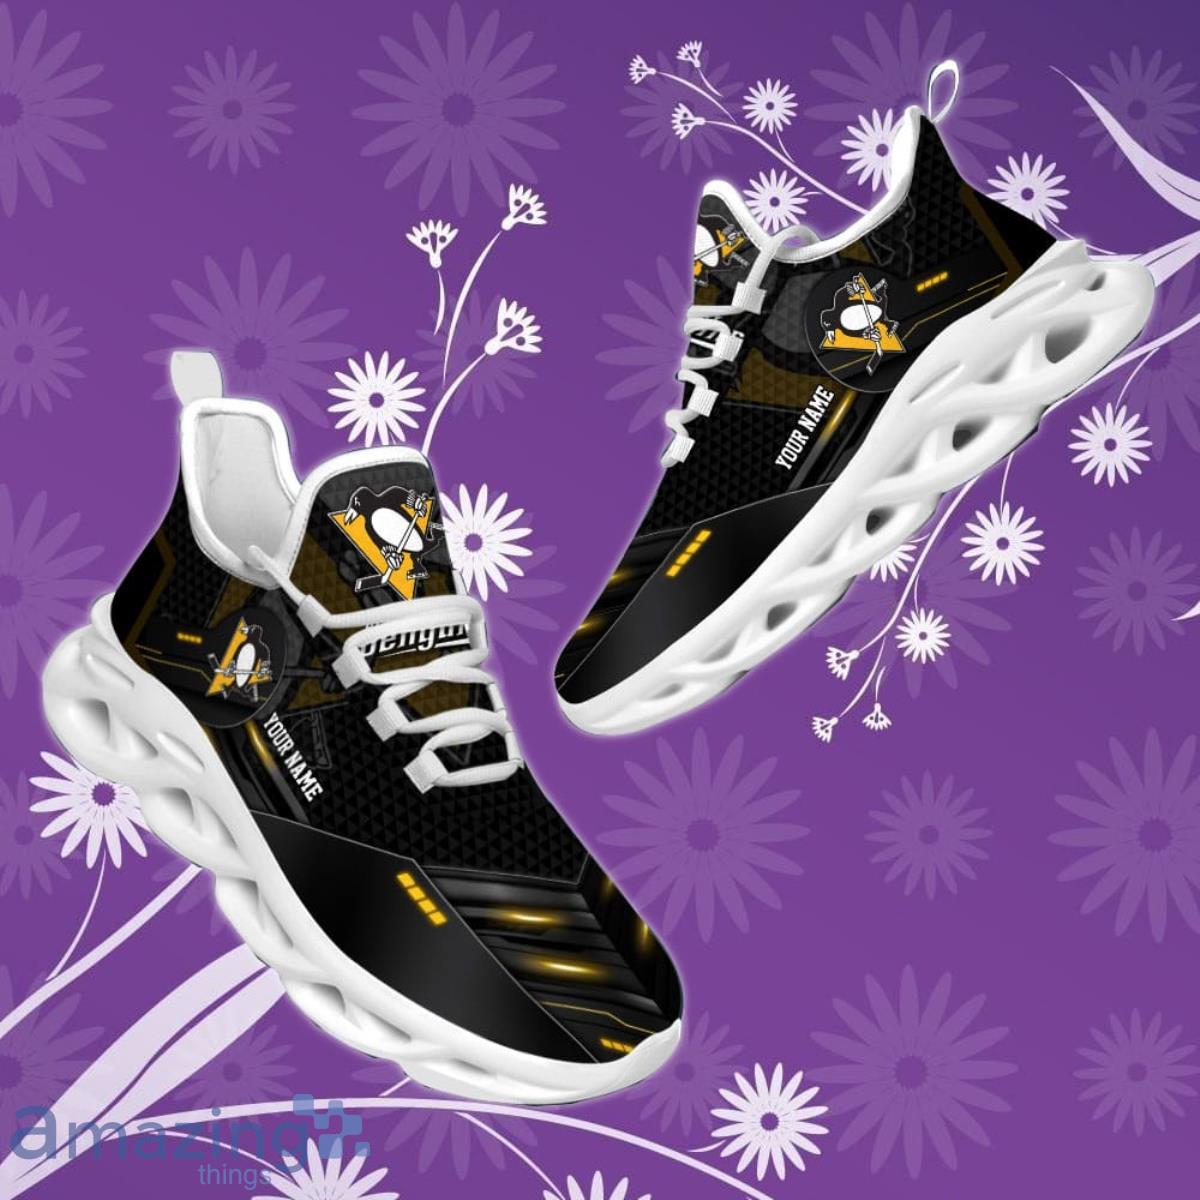 Men's Gold and Purple Fashion Athletic Shoes